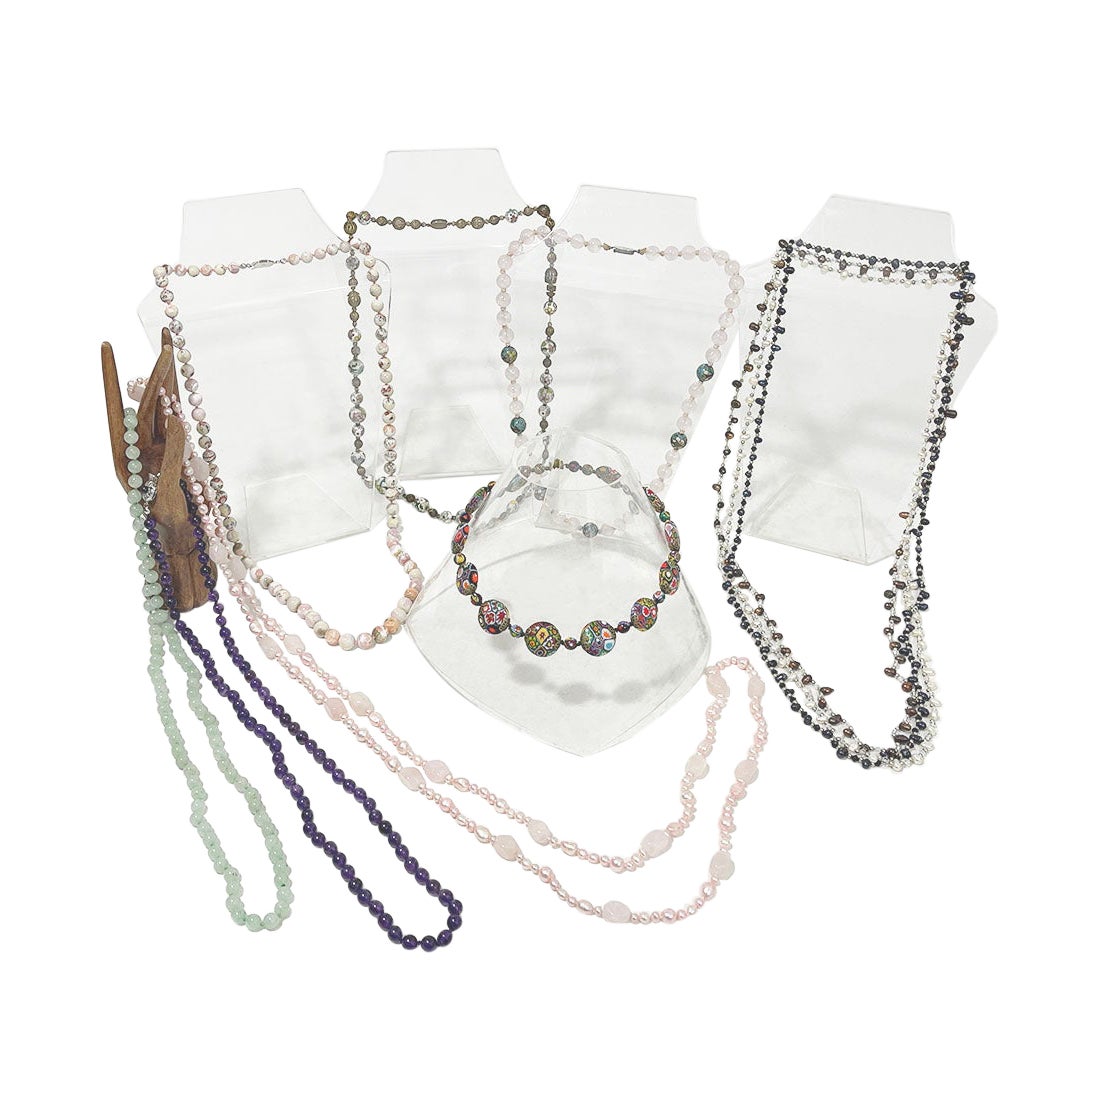 Collection of 10 Mid-20th Century Necklaces with Different Beads and Lengths For Sale